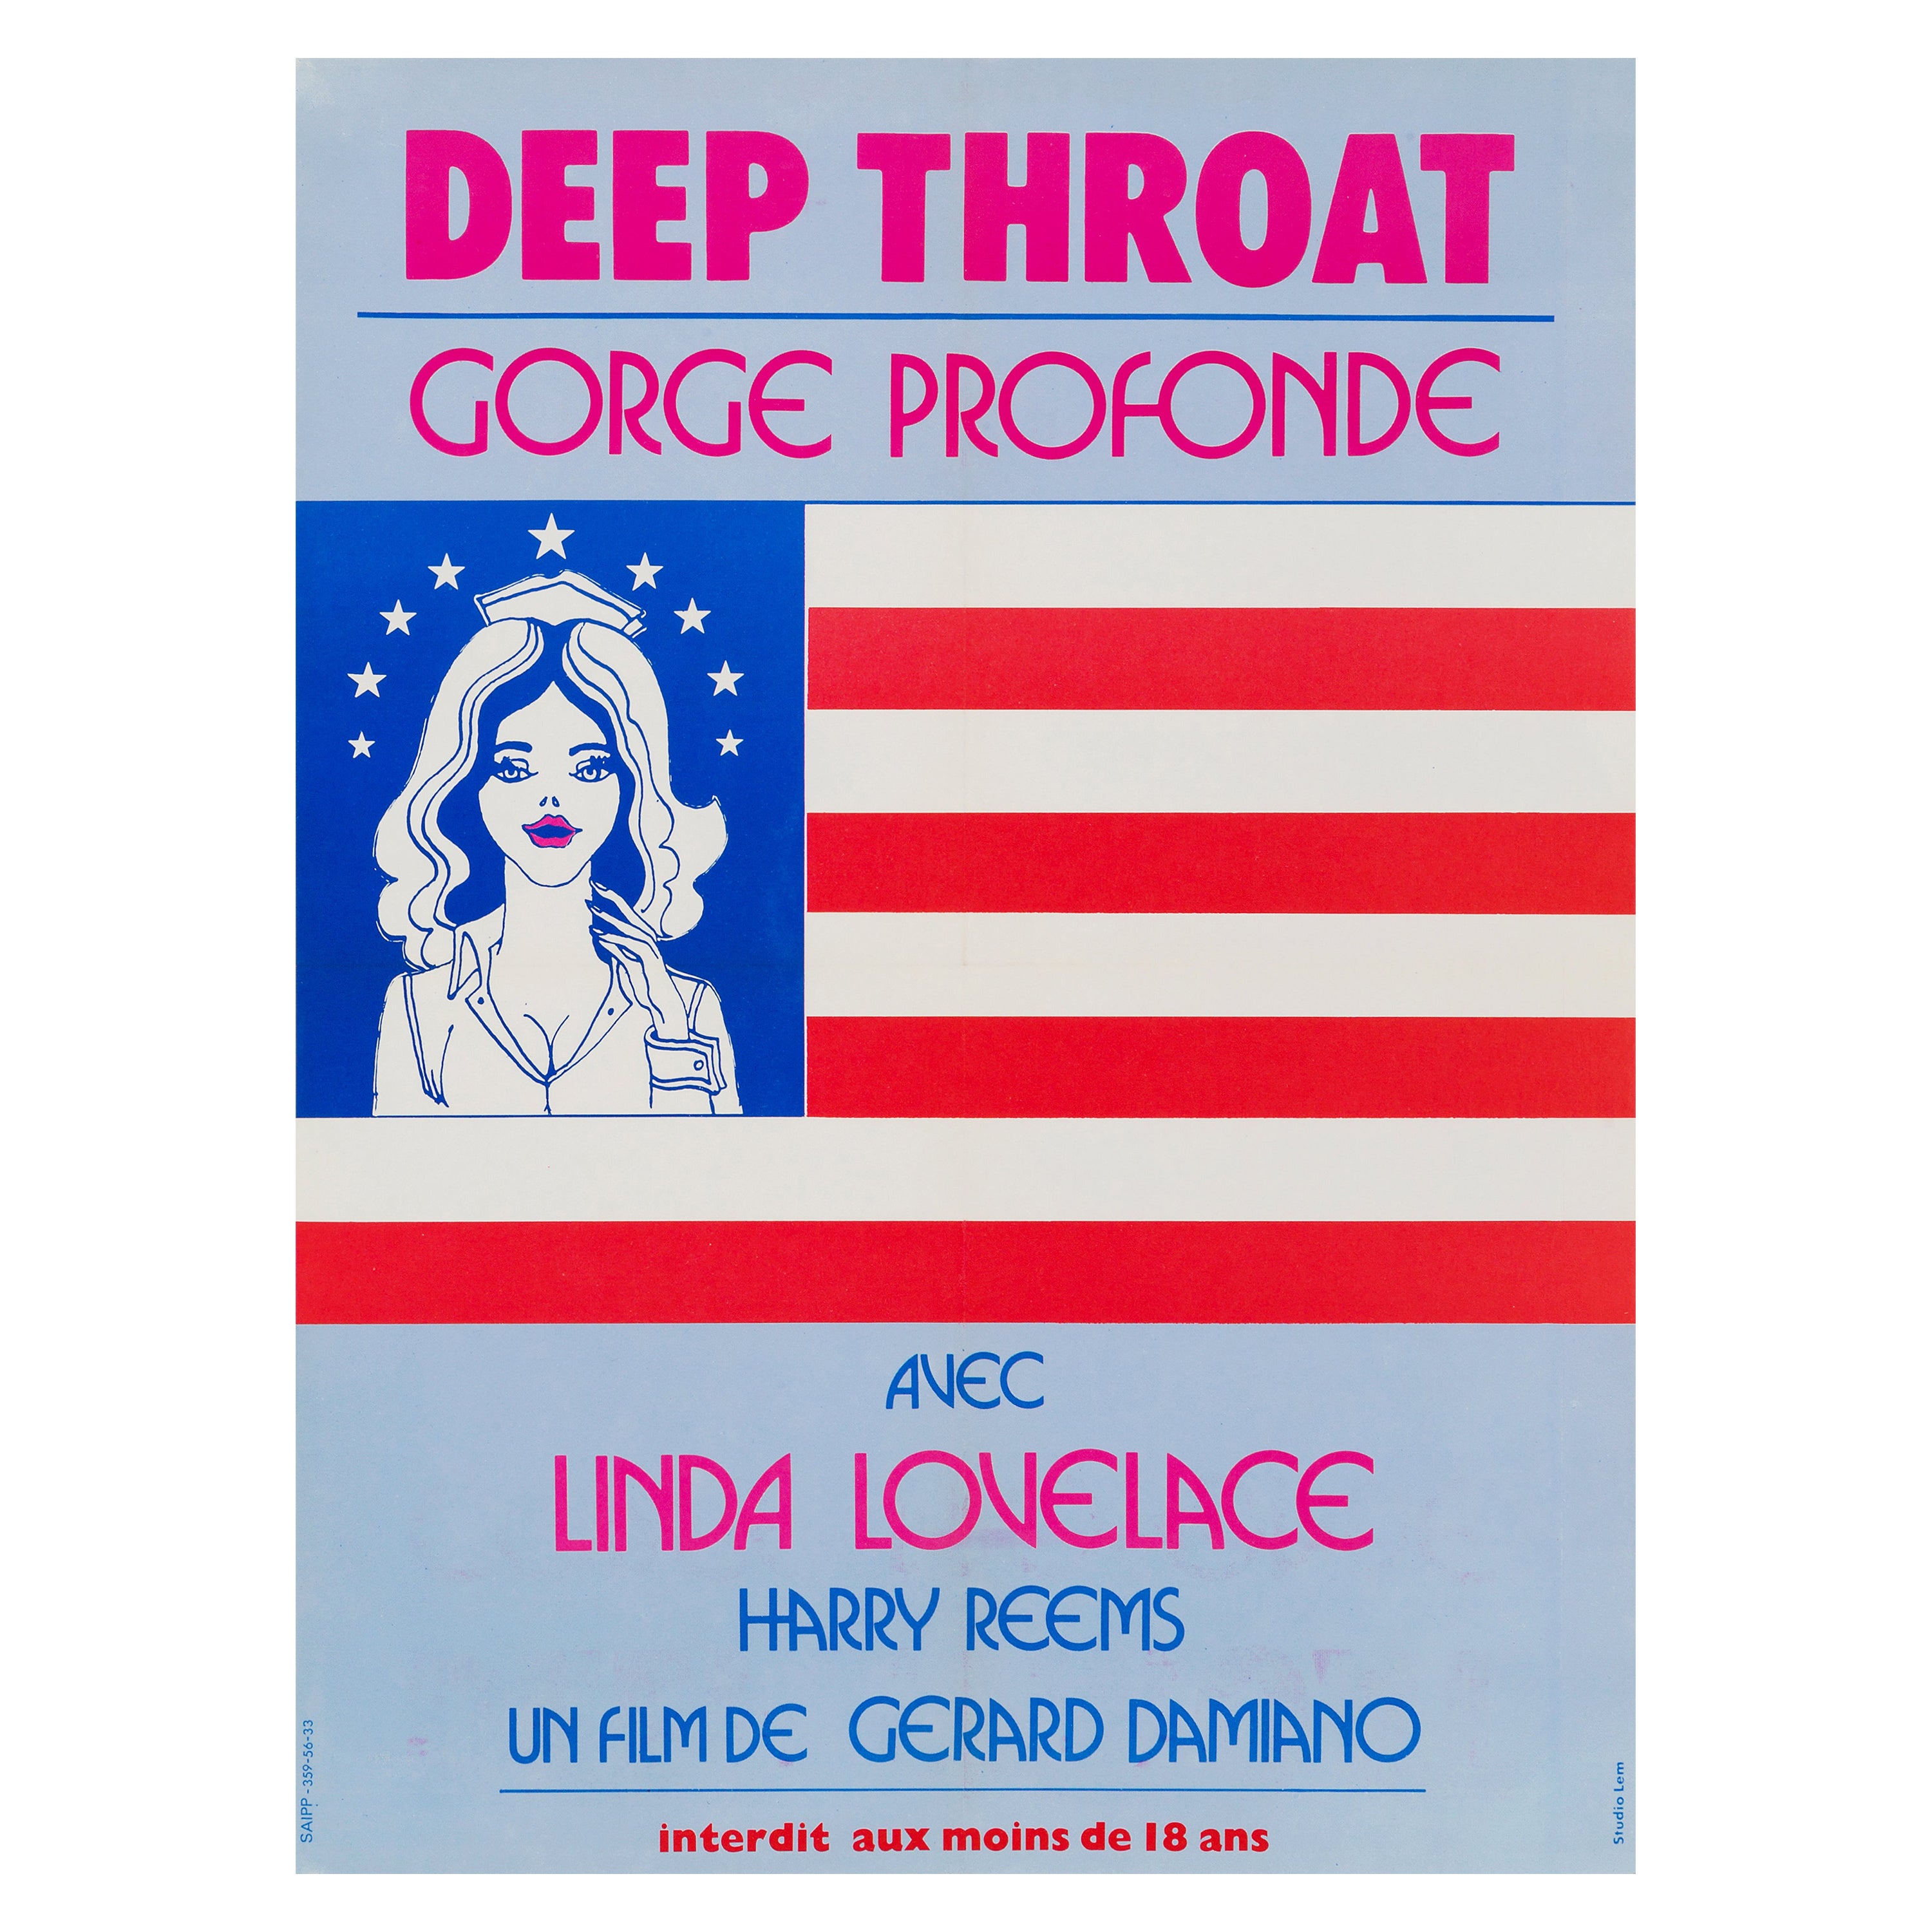 'Deep Throat' Original Vintage Movie Poster by Studio Lem, French, 1975 For Sale